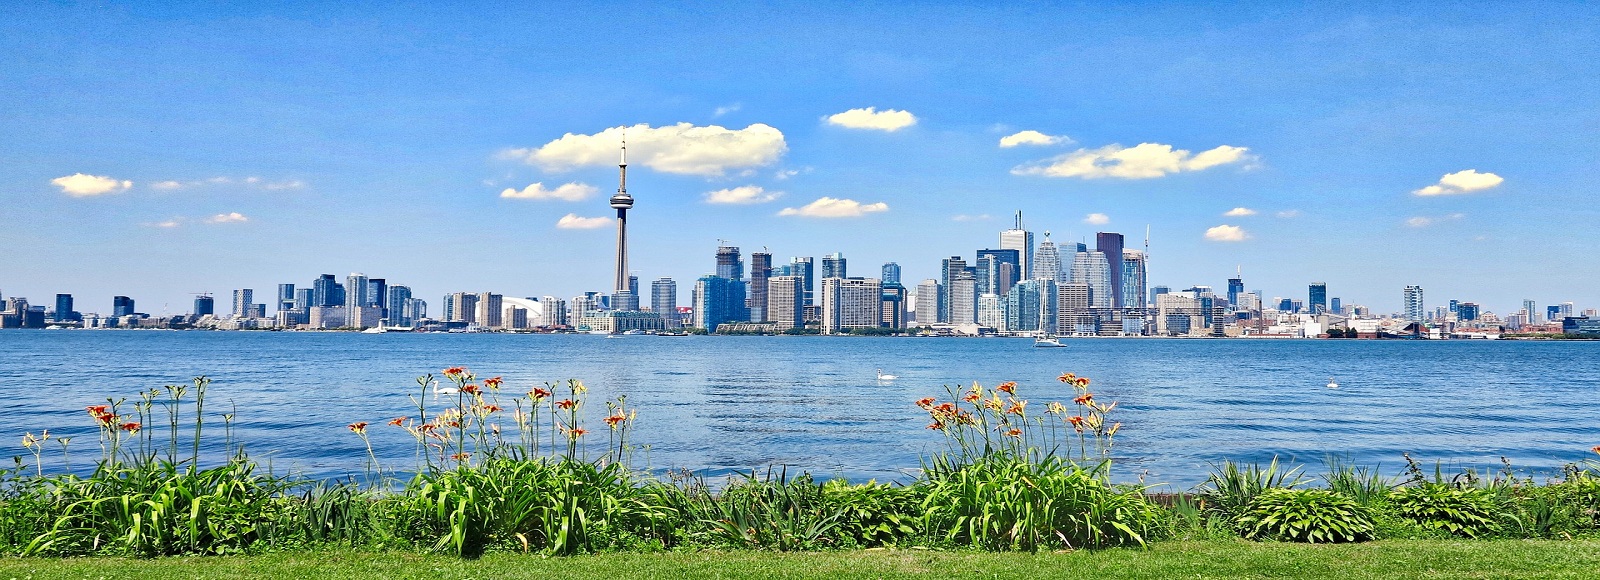 Transfer Offers in Toronto. Low Cost Transfers in  Toronto 